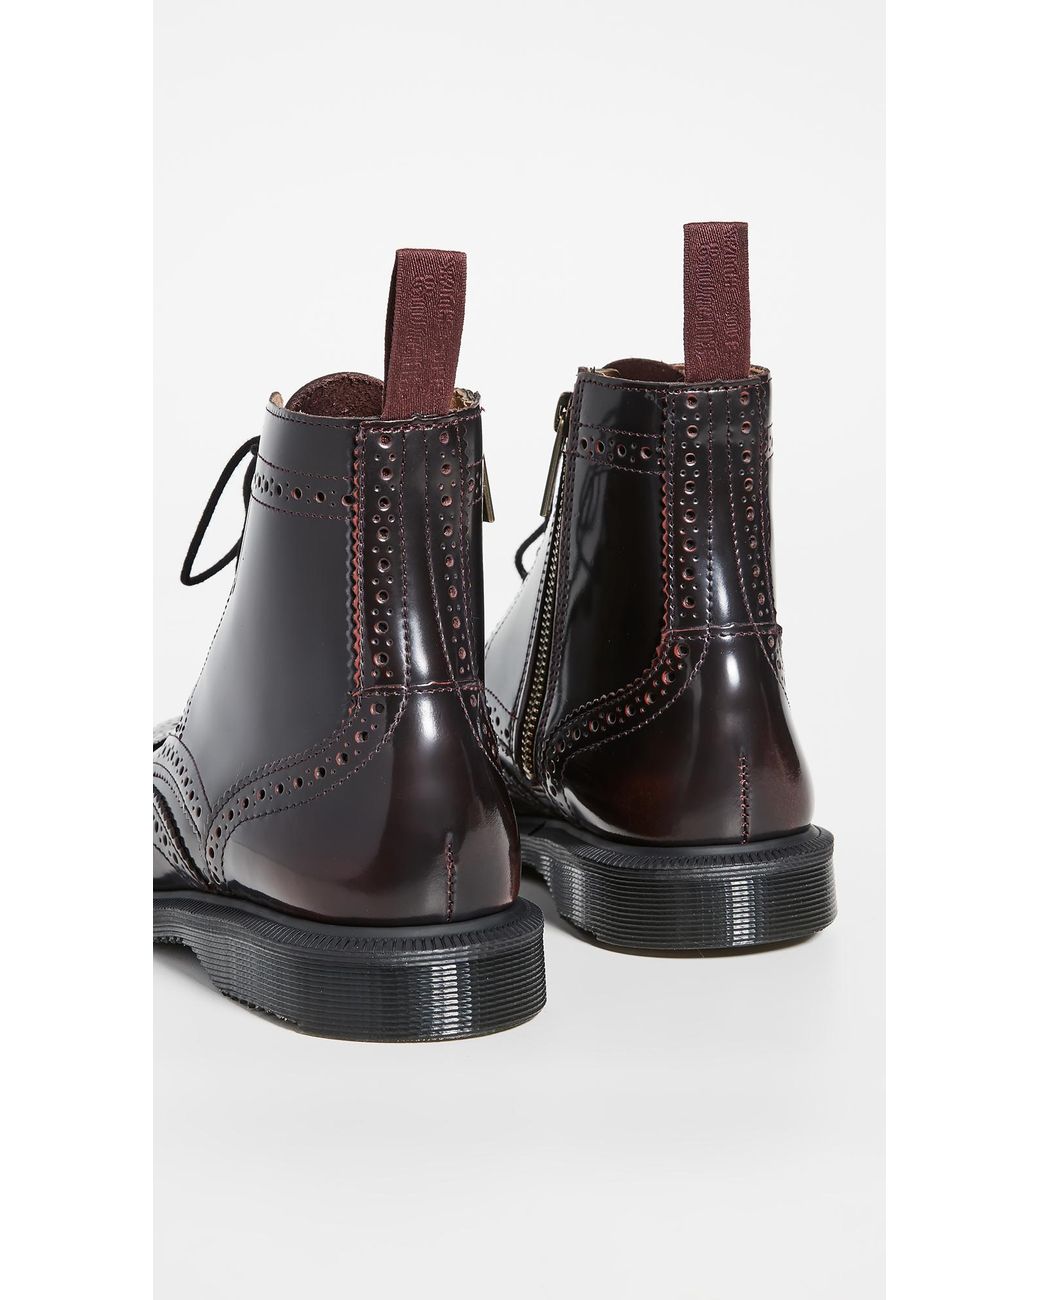 Dr. Martens Leather Delphine 6 Eye Brogue Boots in Cherry Red (Black) | Lyst